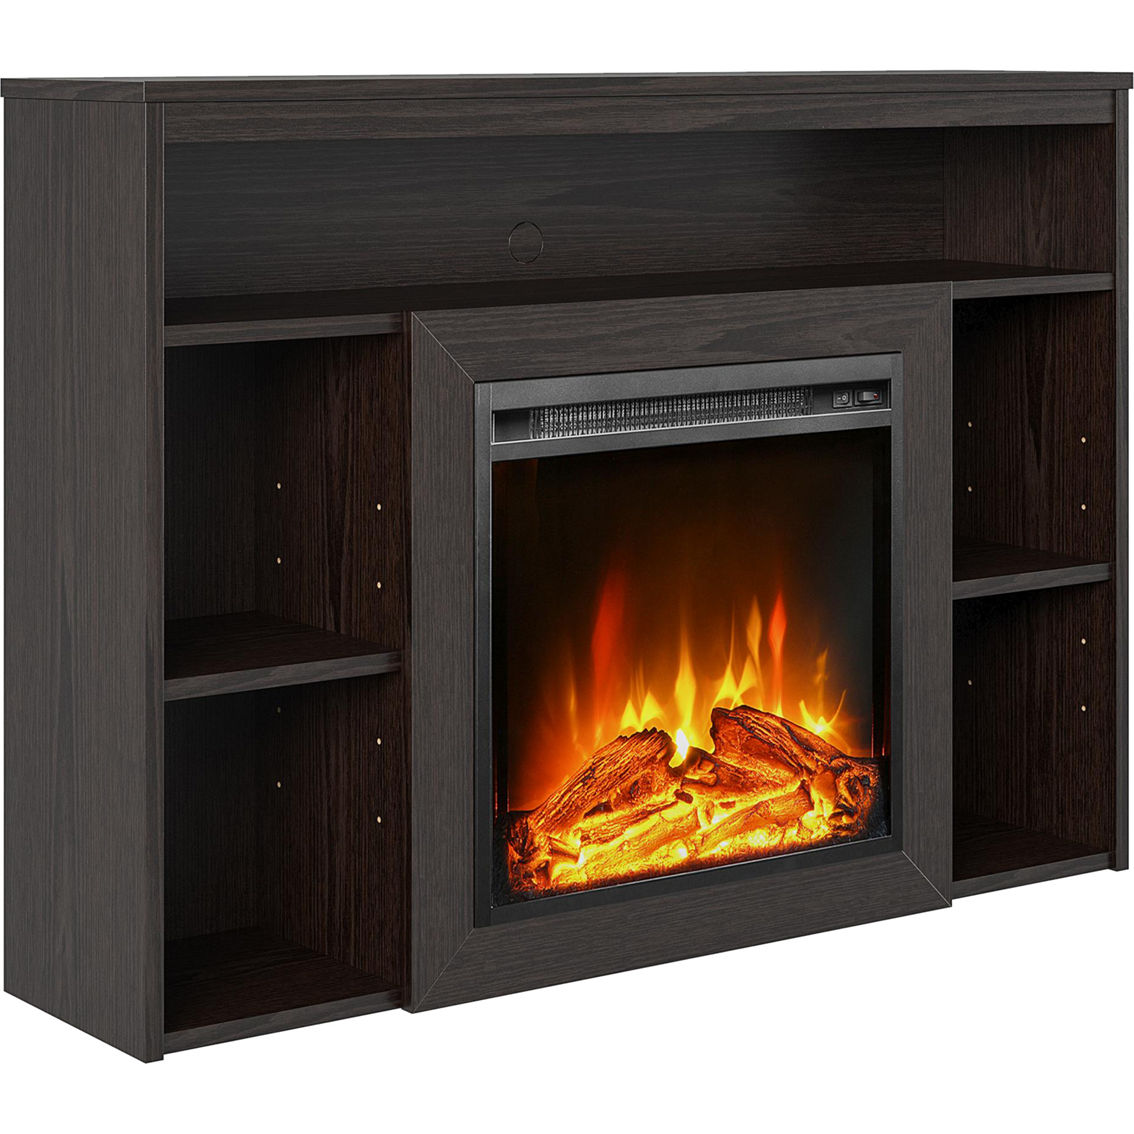 Ameriwood Home Alwick Mantel with Electric Fireplace, Espresso - Image 2 of 6